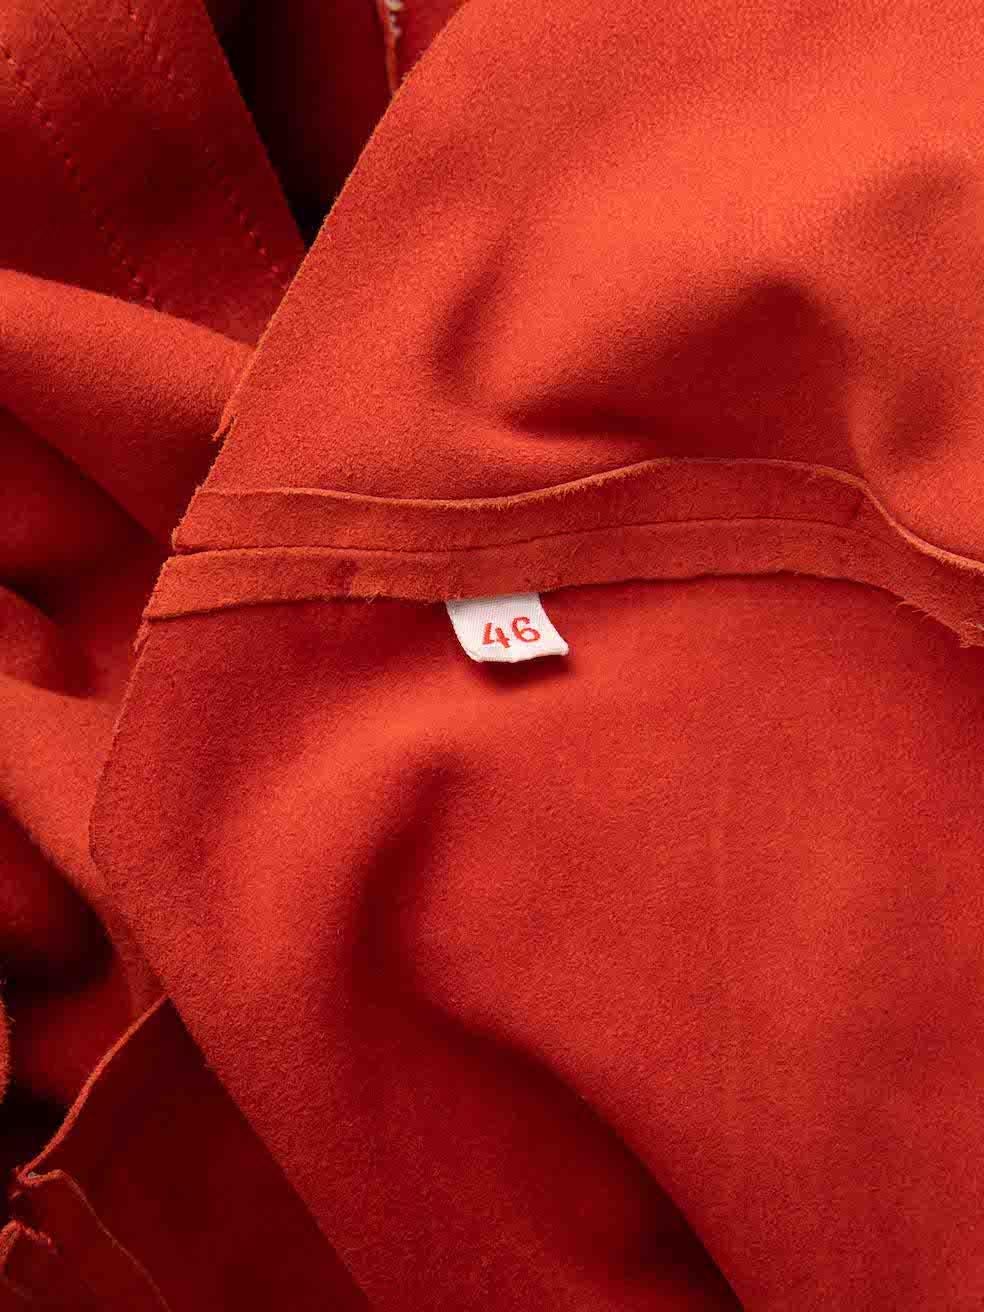 Loewe Red Suede Long Sleeve Top Size XXXL For Sale 3